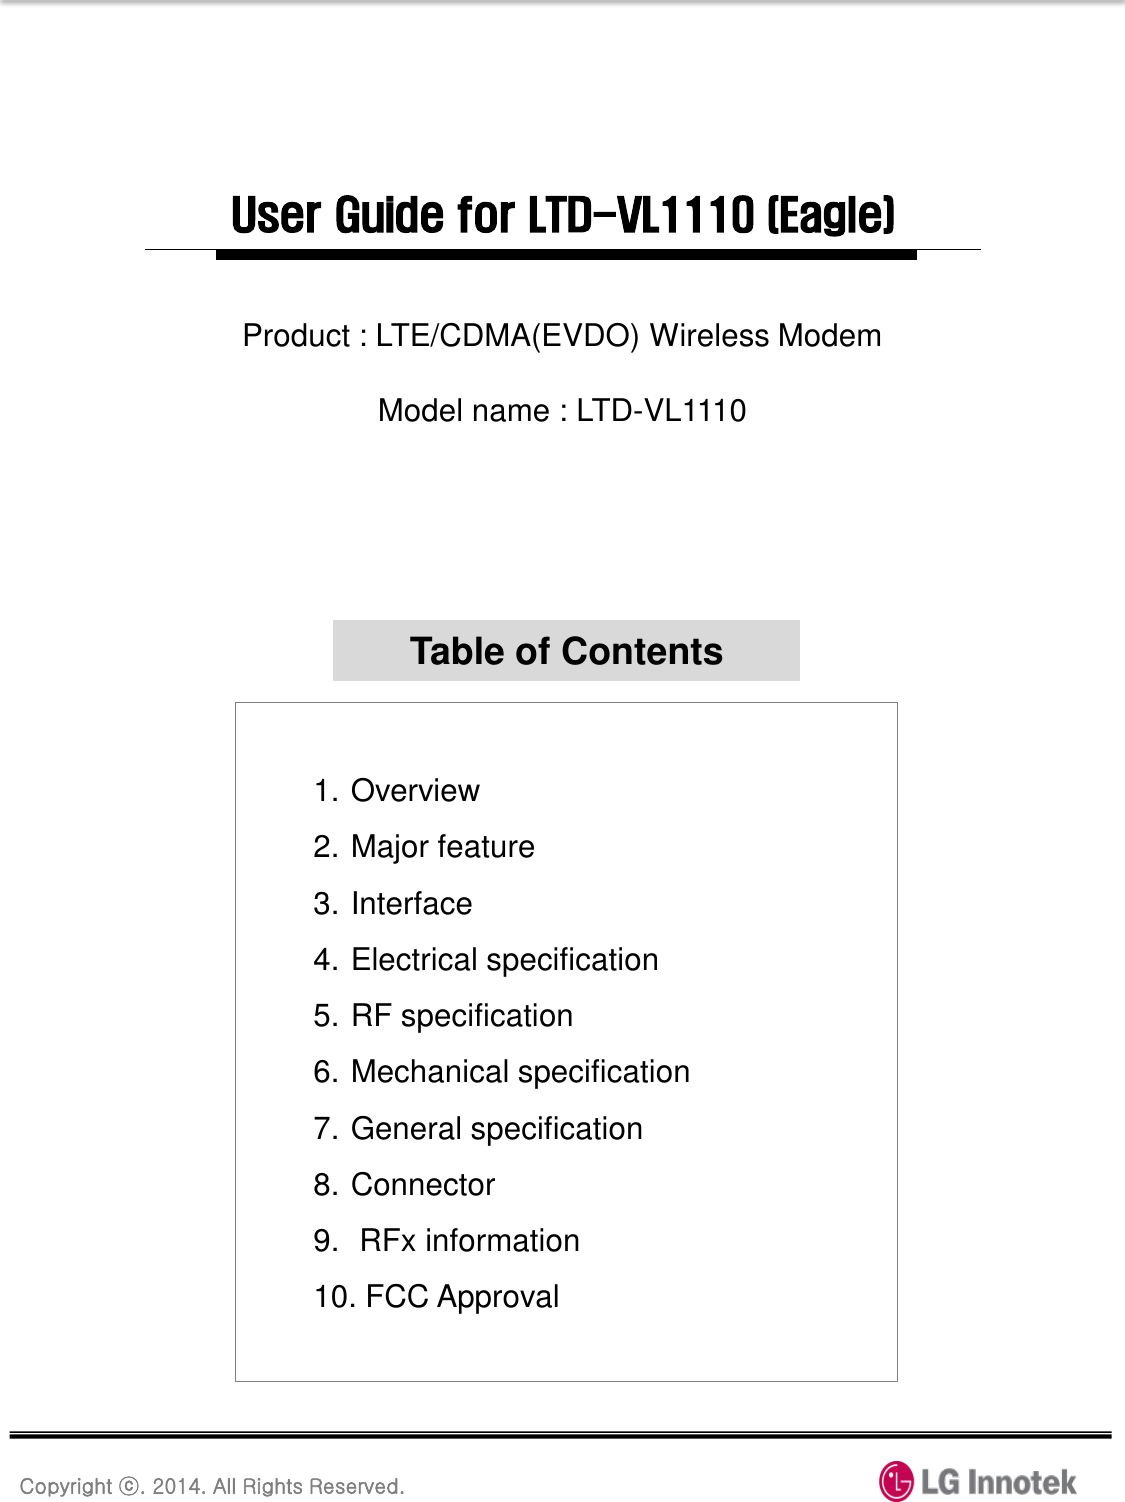 Copyright ⓒ. 2014. All Rights Reserved. User Guide for LTD-VL1110 (Eagle) 1. Overview 2. Major feature 3. Interface 4. Electrical specification 5. RF specification 6. Mechanical specification 7. General specification 8. Connector 9.  RFx information 10. FCC Approval Table of Contents Product : LTE/CDMA(EVDO) Wireless Modem  Model name : LTD-VL1110 